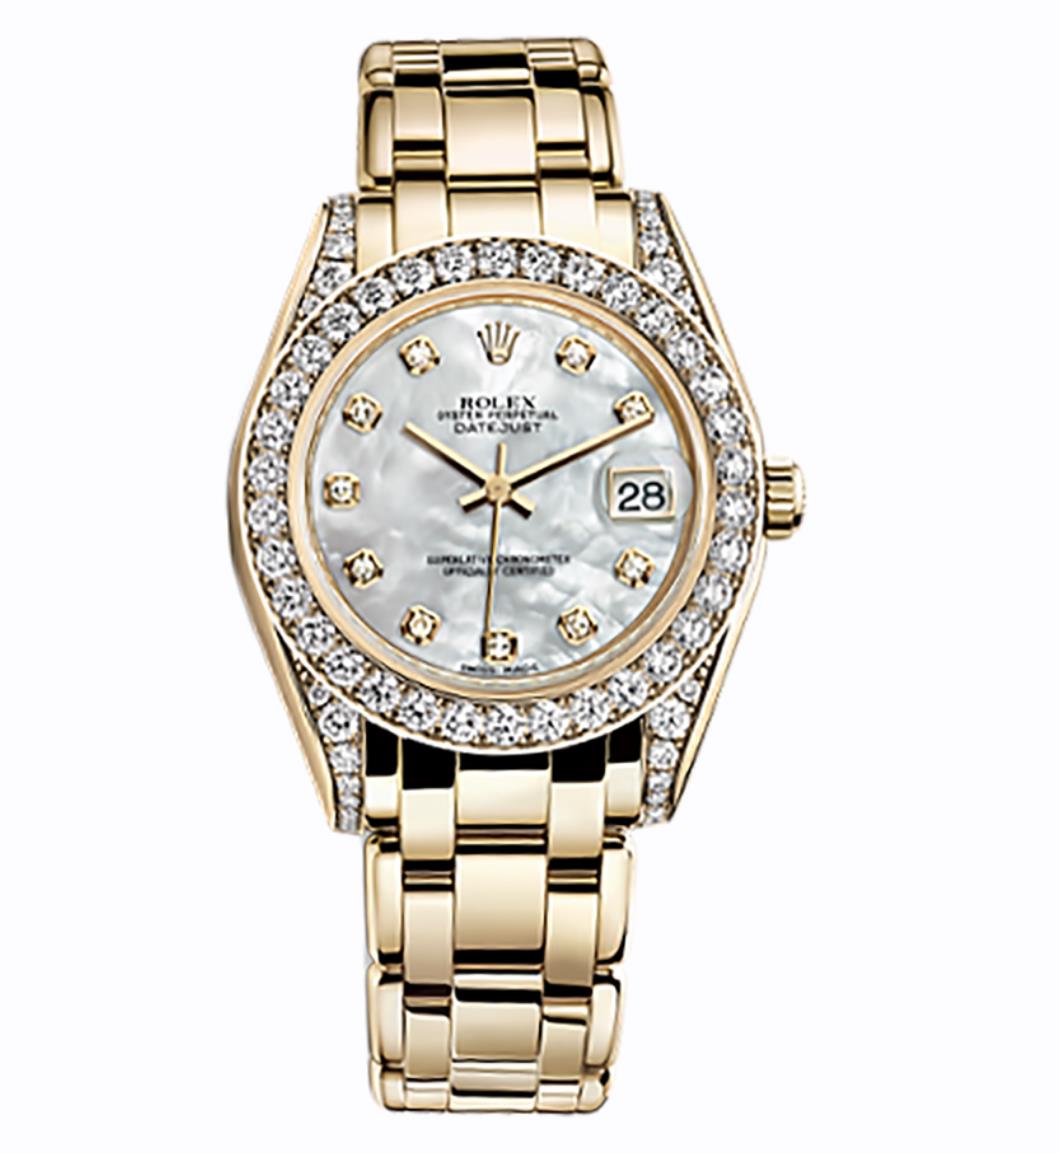 The white dial fake watch is decorated with diamonds.